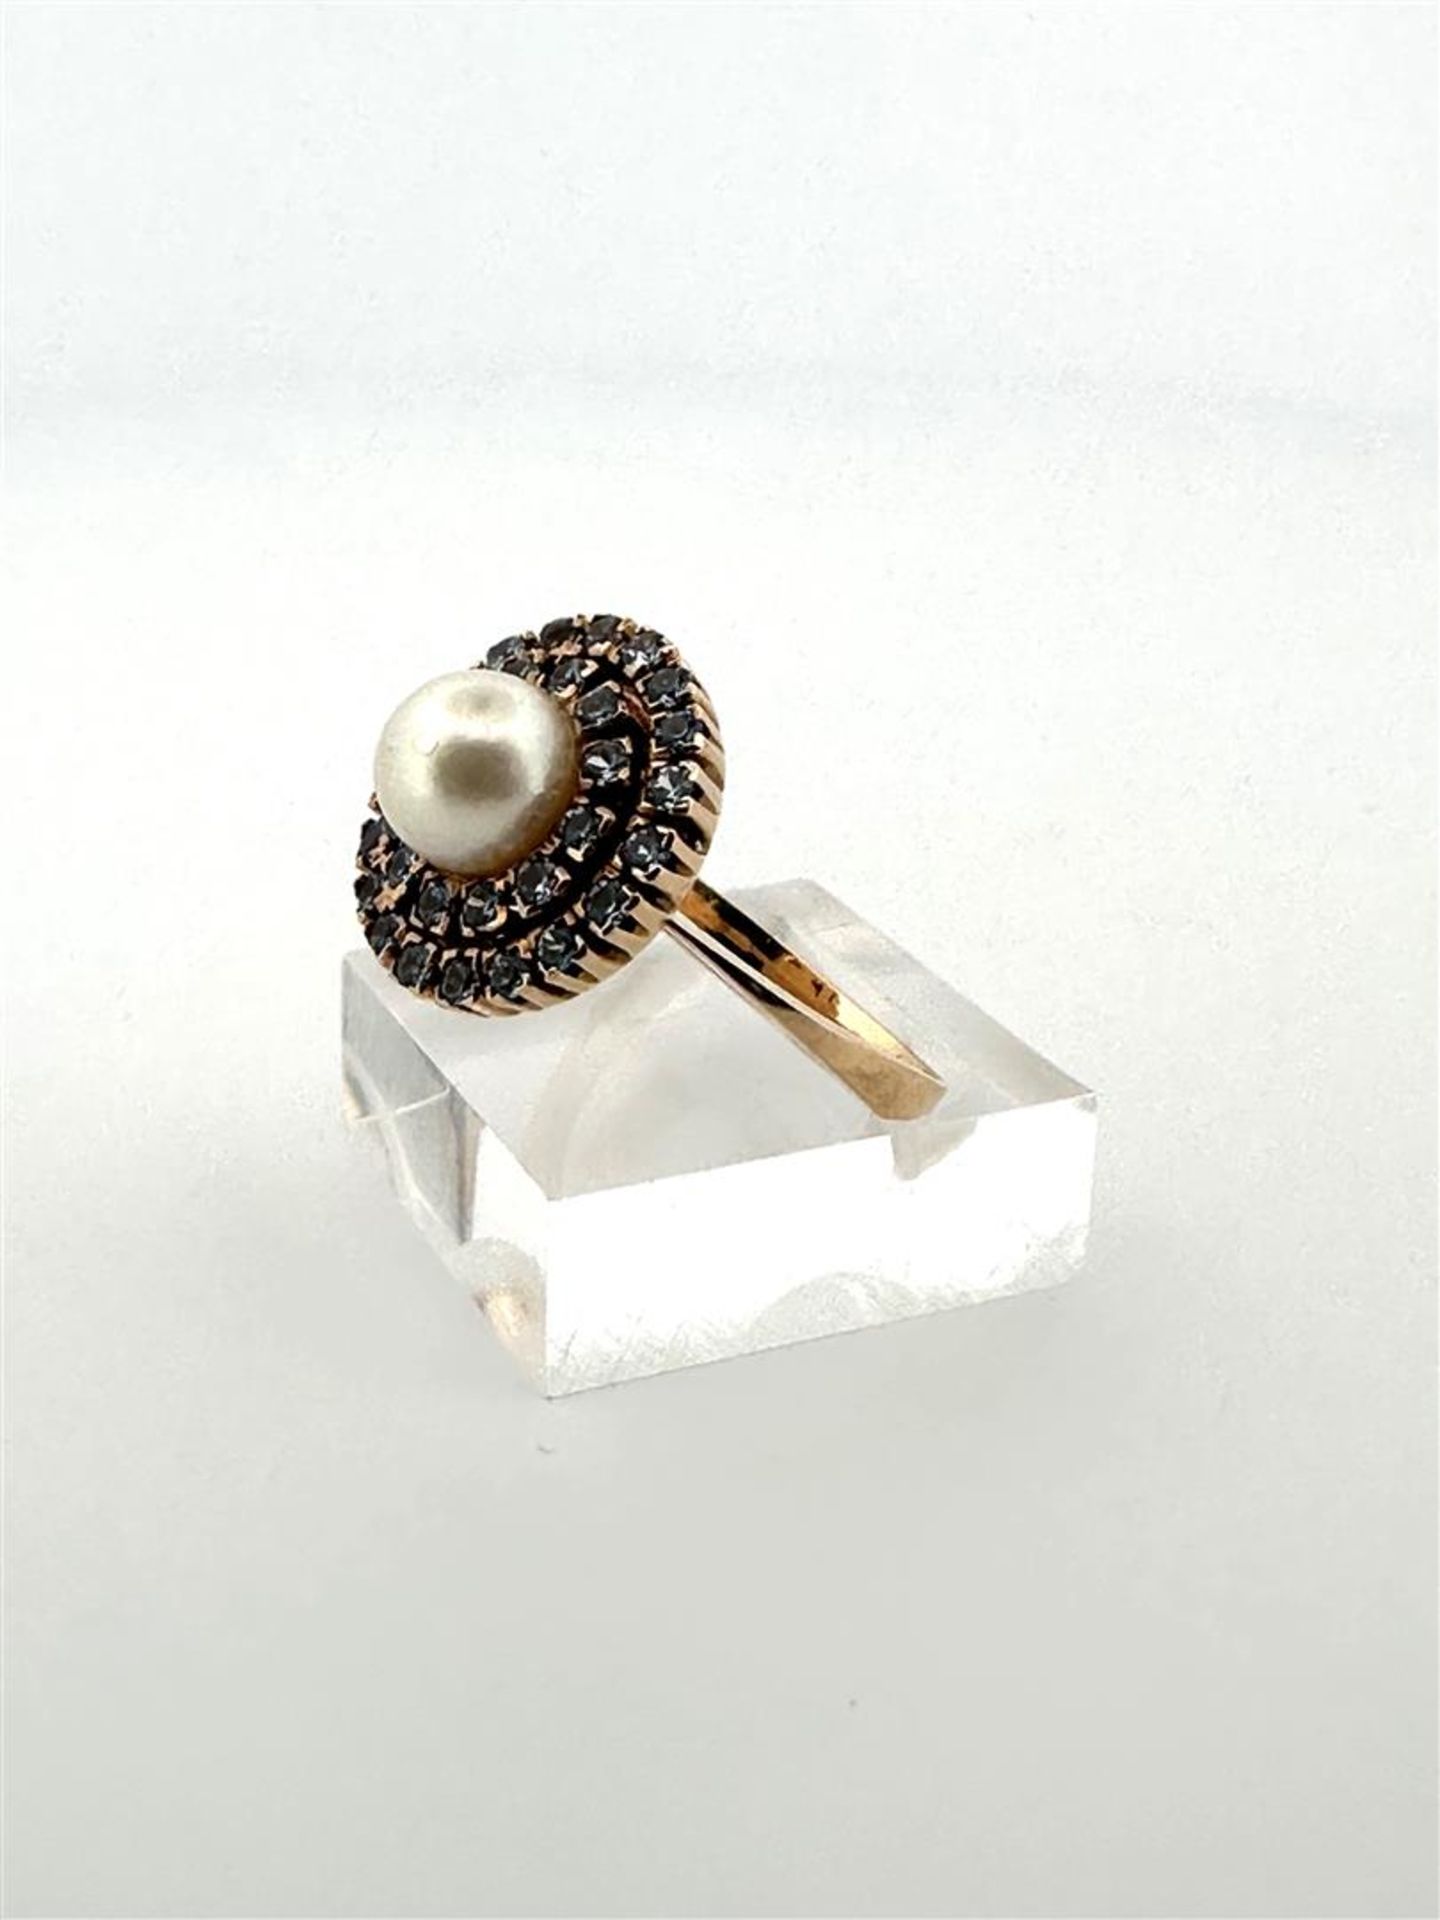 14kt yellow gold cocktail ring set with pearl and light blue apatite gemstones. 
Of which 31 brillia - Image 2 of 4